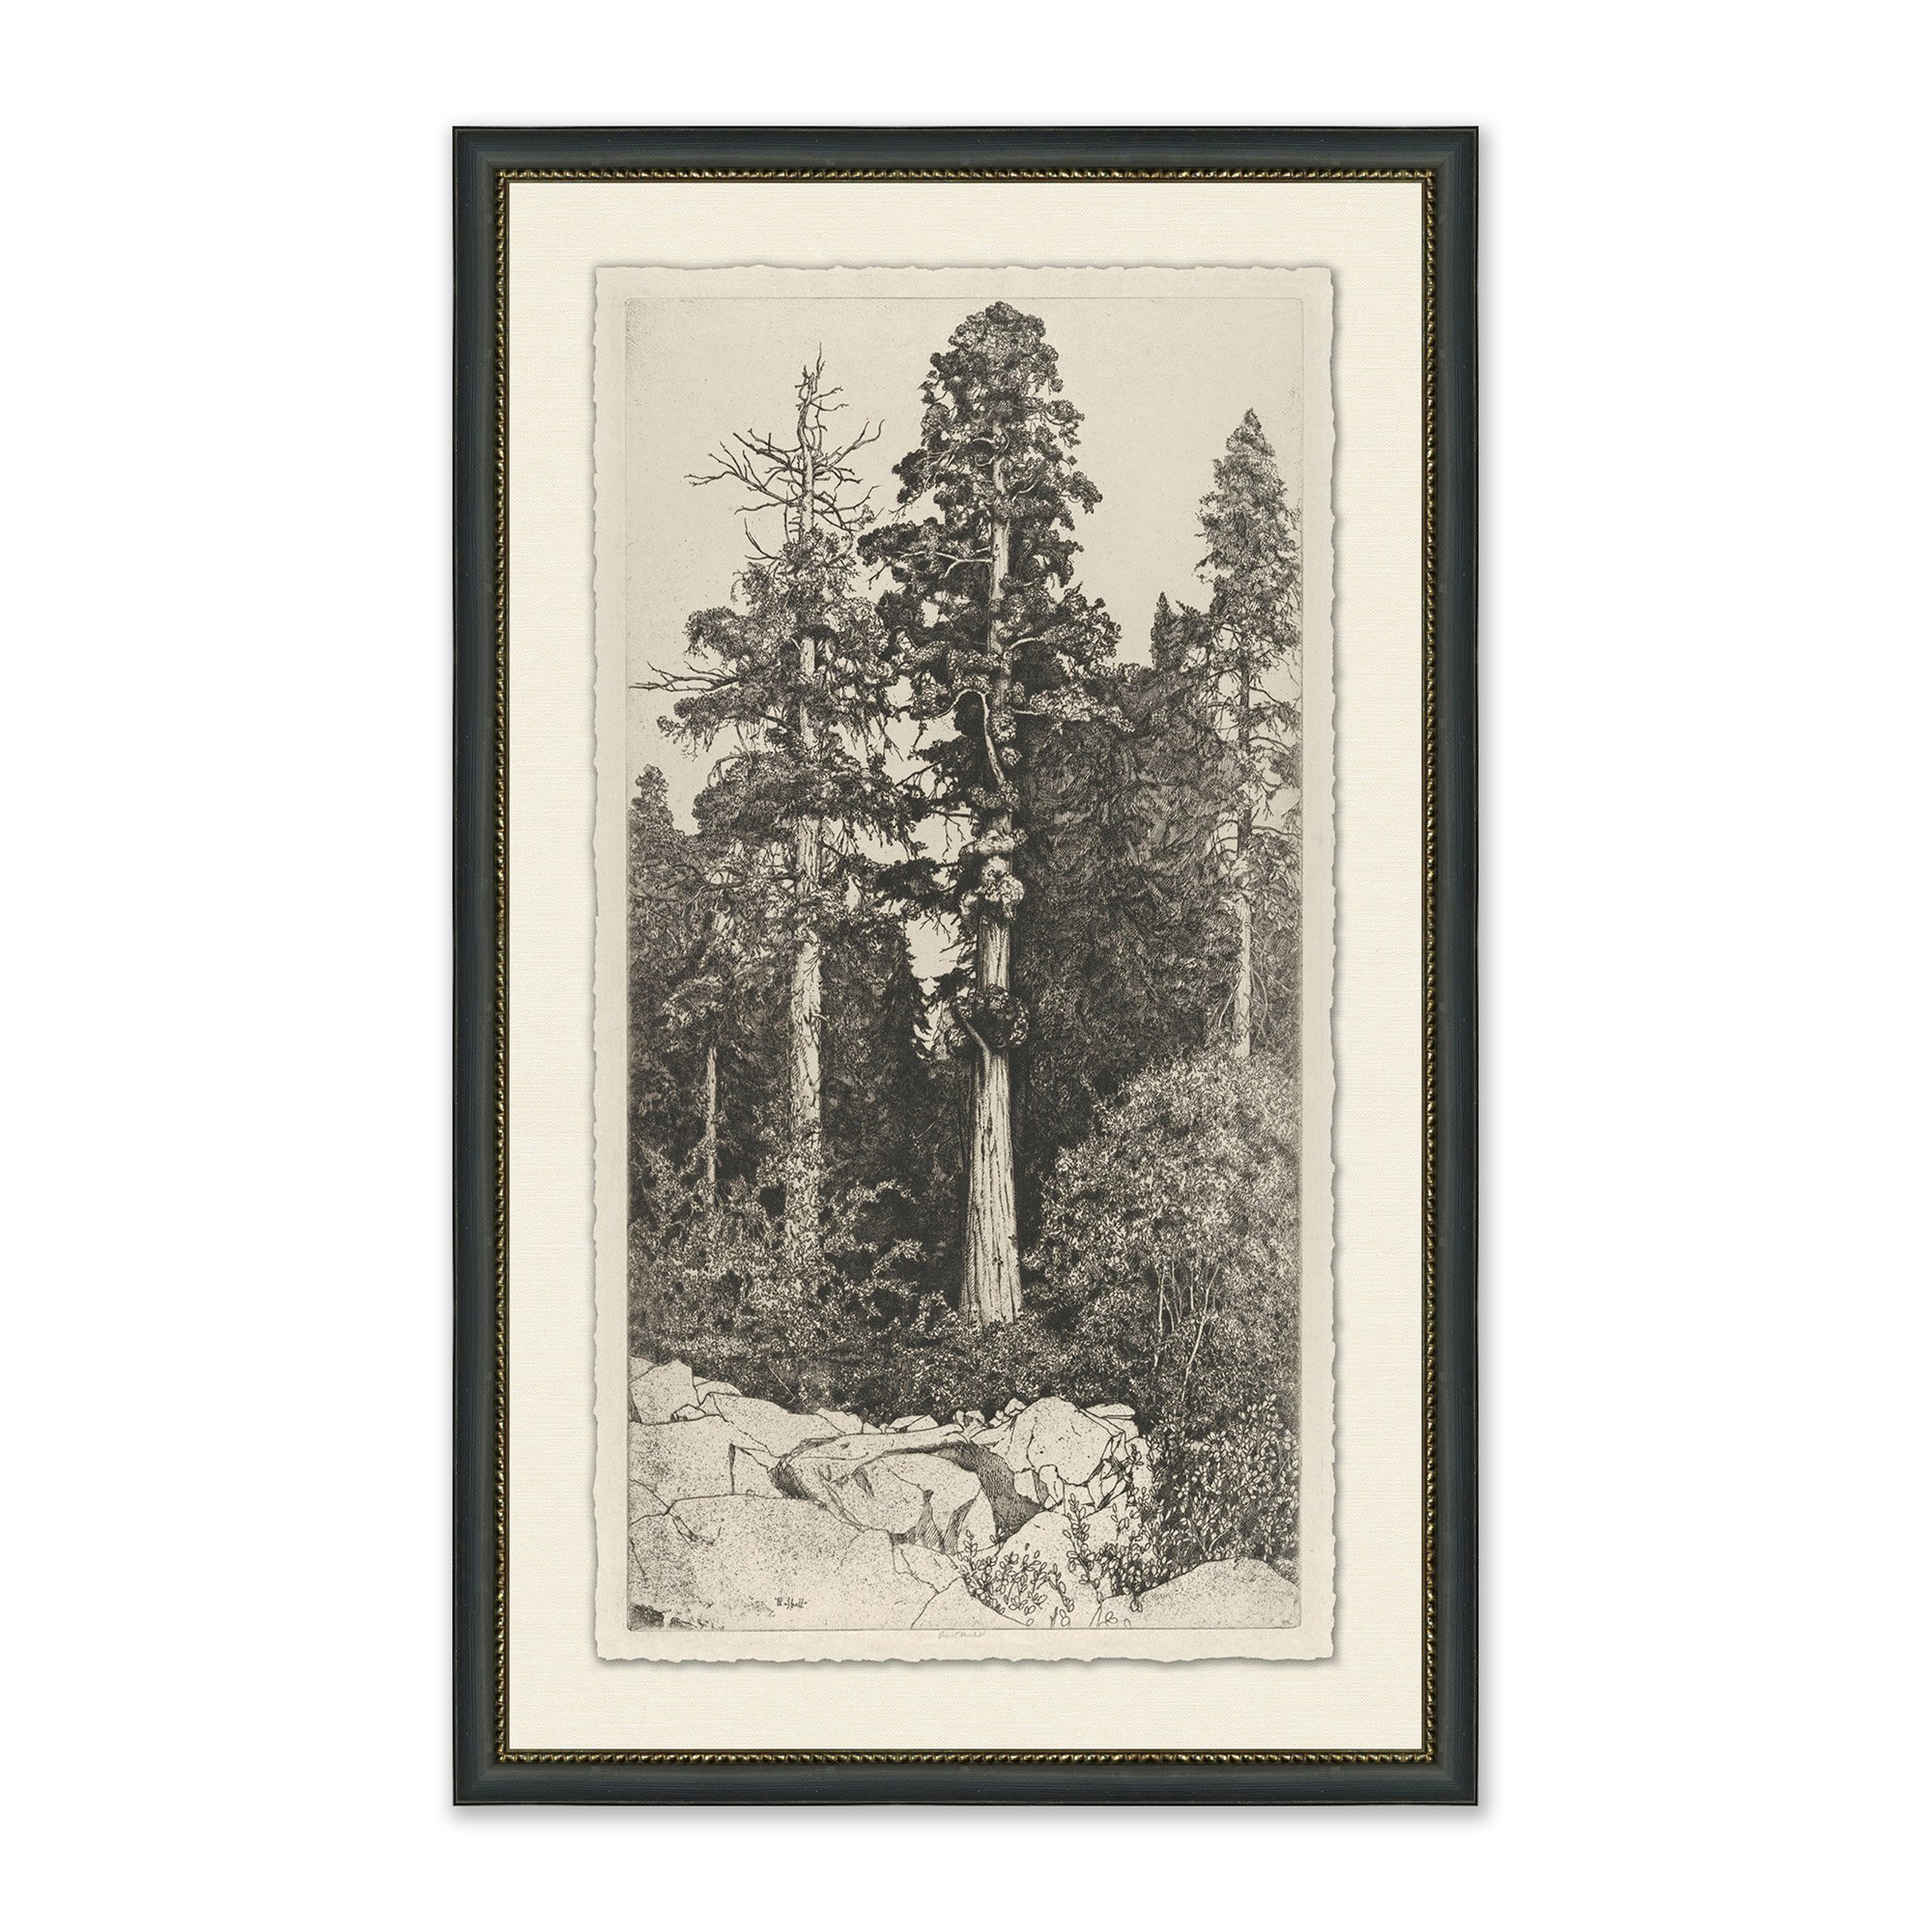 framed wall art shows portrait sketch of tall trees in forest in black frame with cream mat $318.00